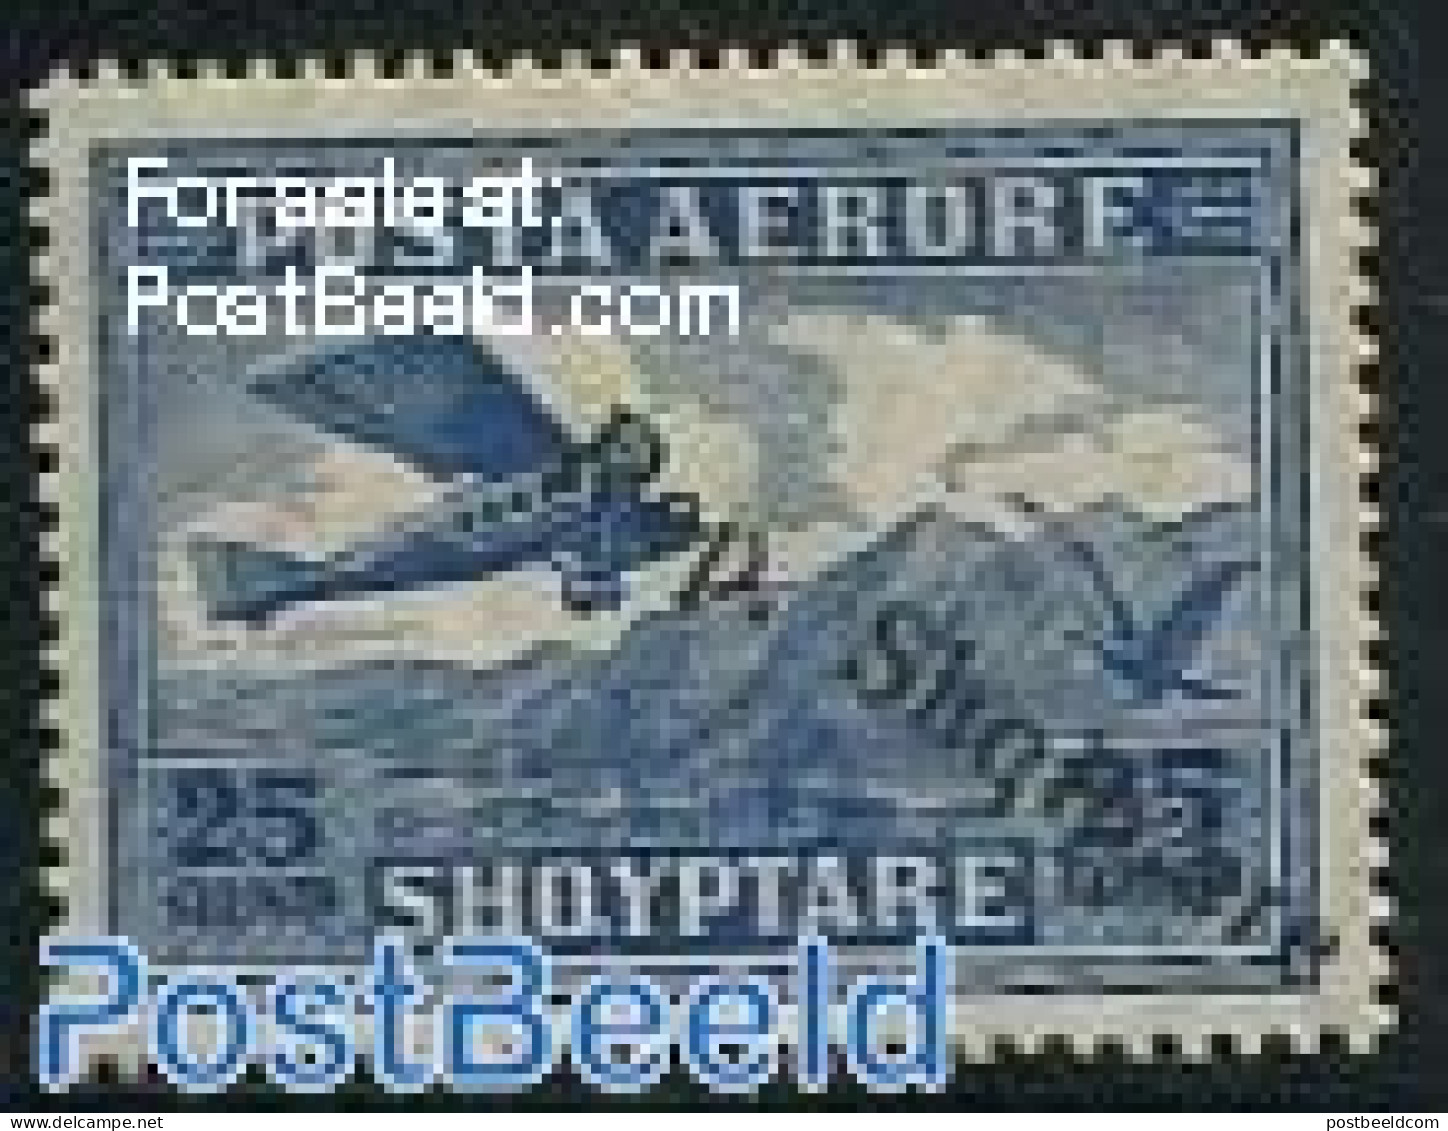 Albania 1927 25Q, Stamp Out Of Set, Unused (hinged), Nature - Transport - Birds - Aircraft & Aviation - Vliegtuigen